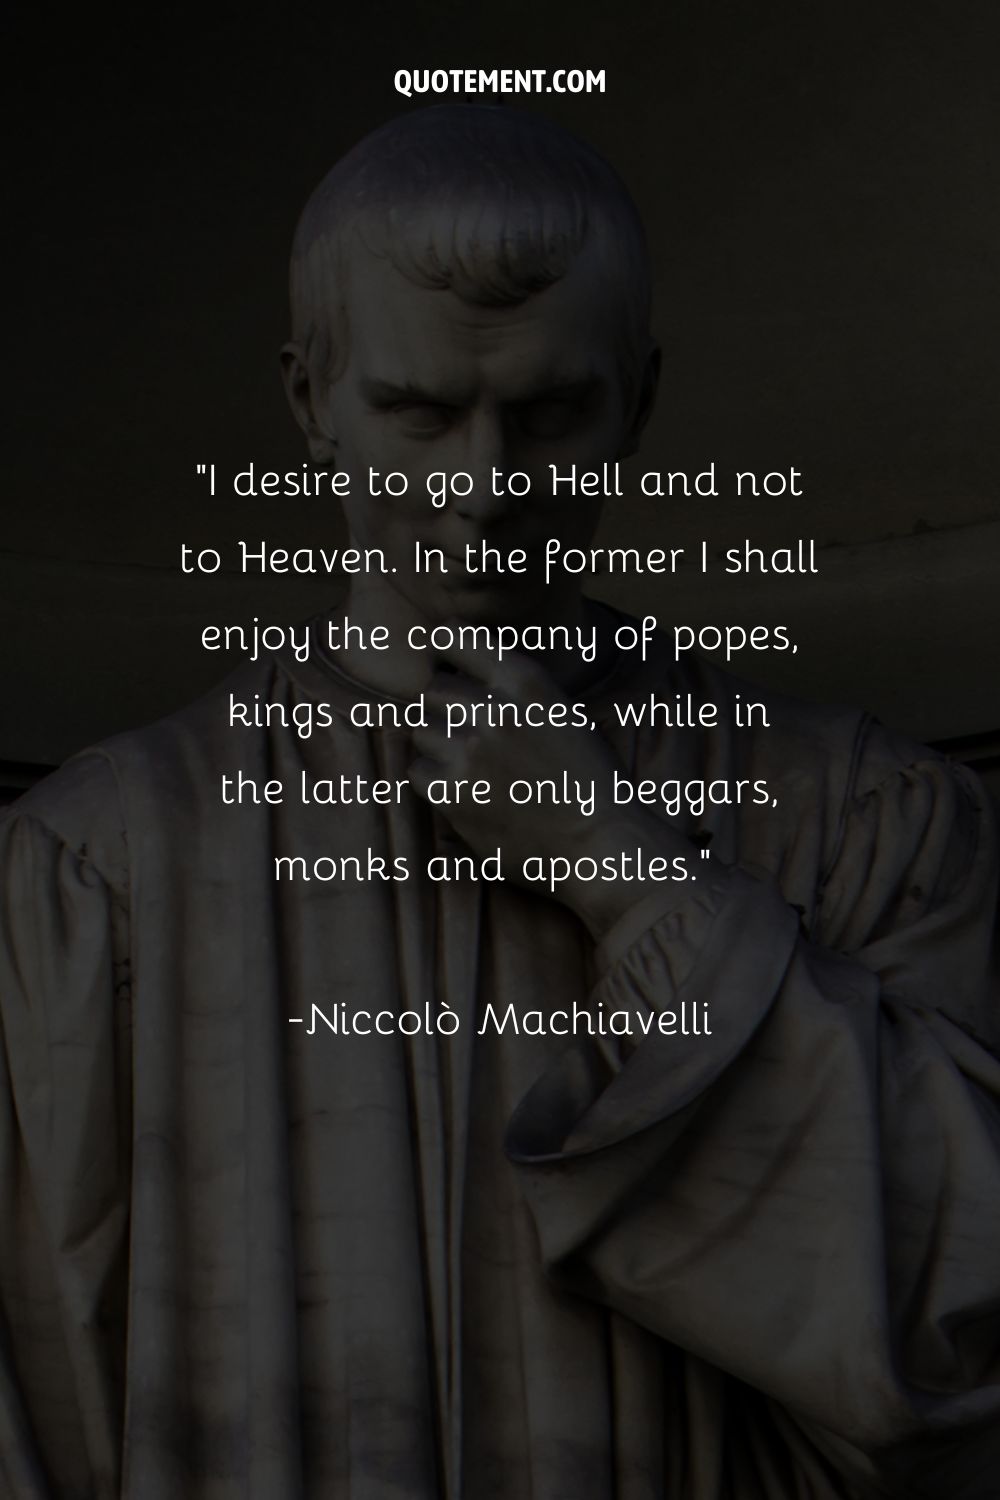 I desire to go to Hell and not to Heaven. In the former I shall enjoy the company of popes, kings and princes, while in the latter are only beggars, monks and apostles